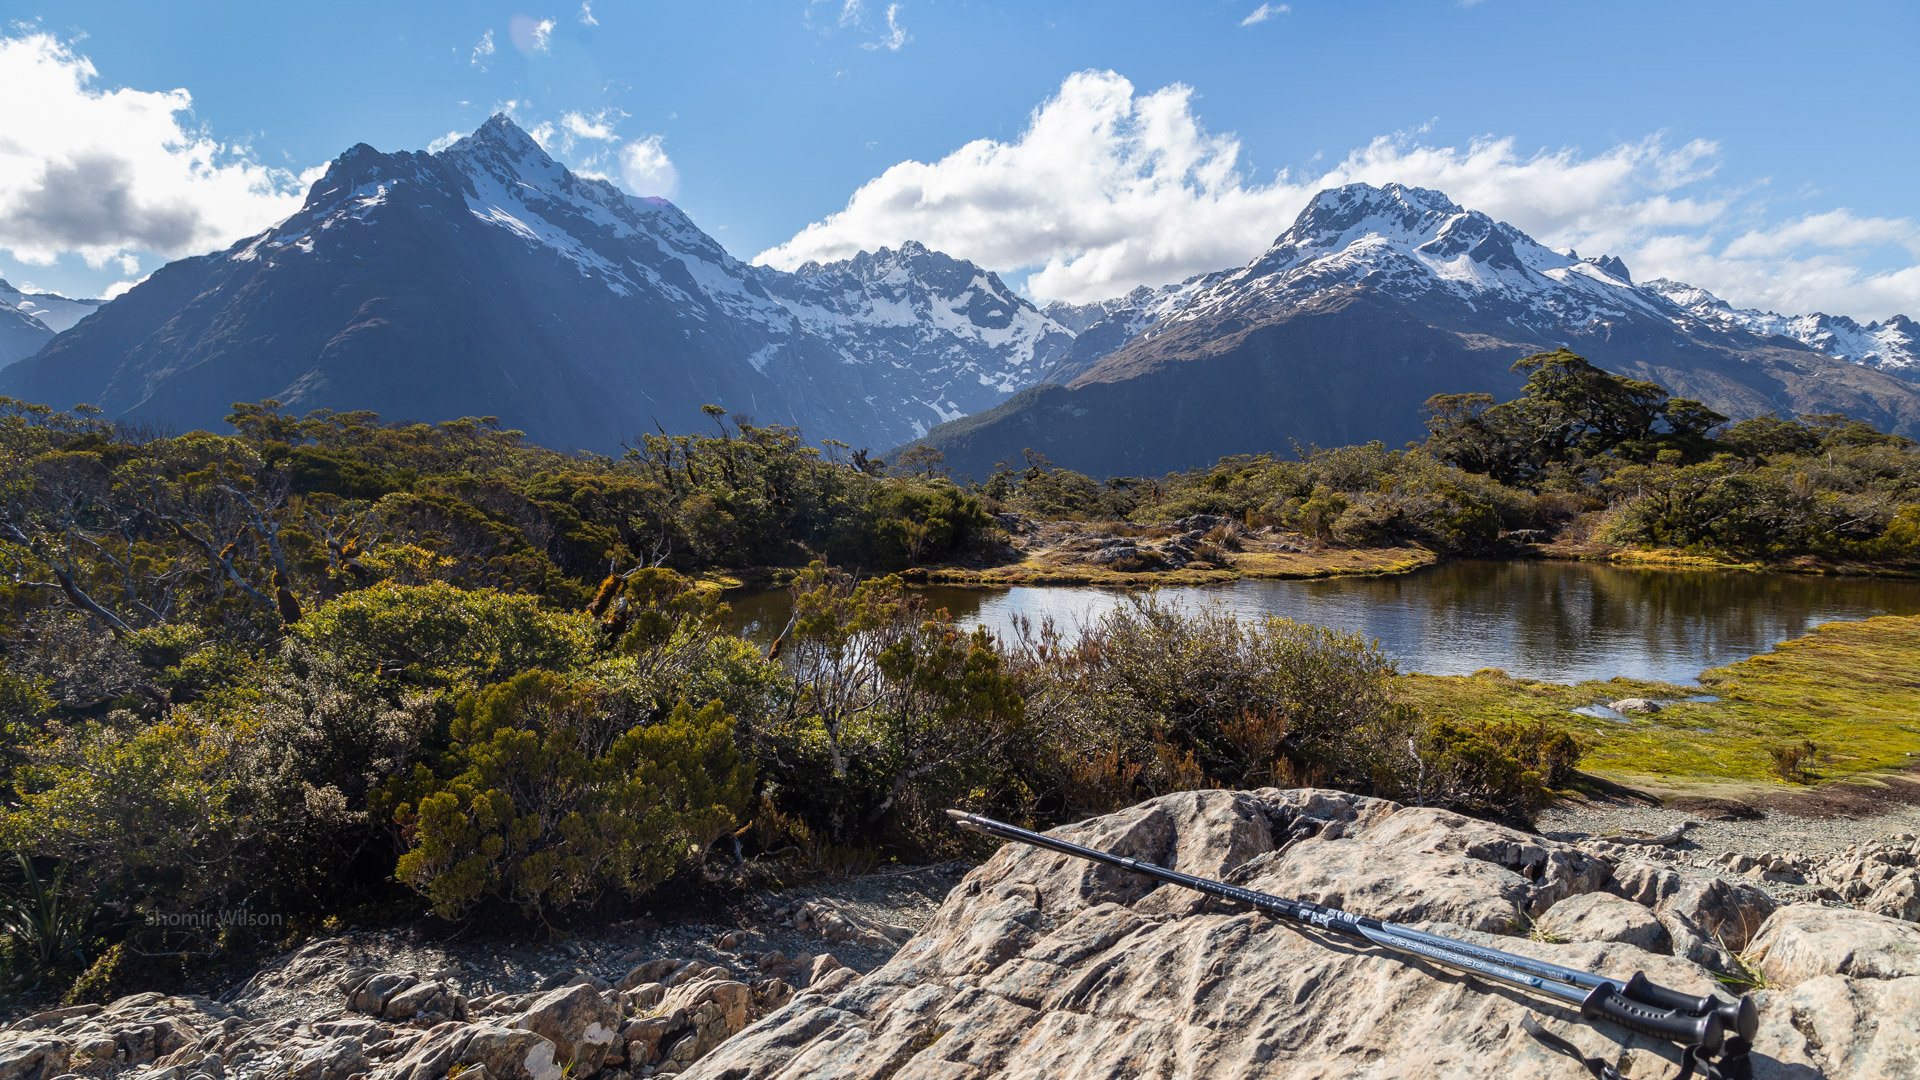 foreground, below: trekking poles, a pond, and scrubby foliage; background, above: mountains and blue sky with a few clouds